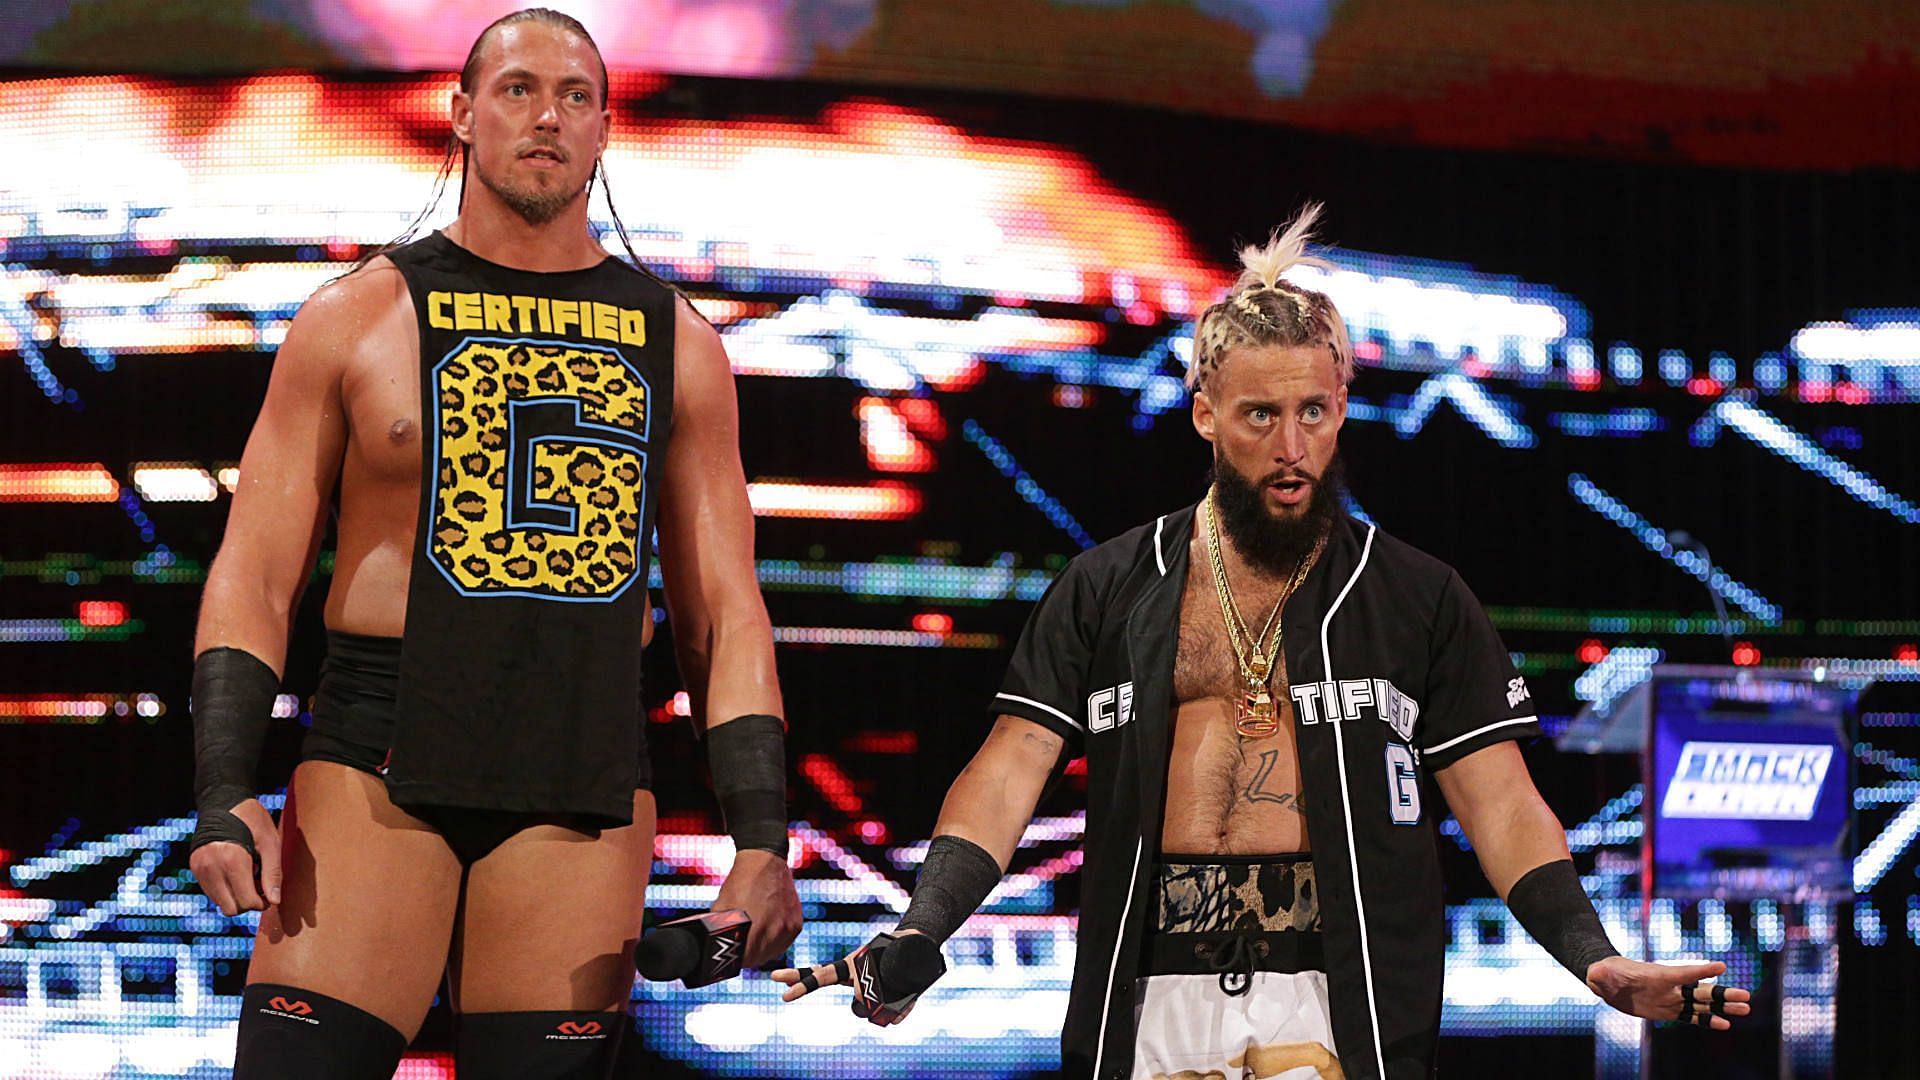 Enzo and Cass were extremely popular and entertaining.